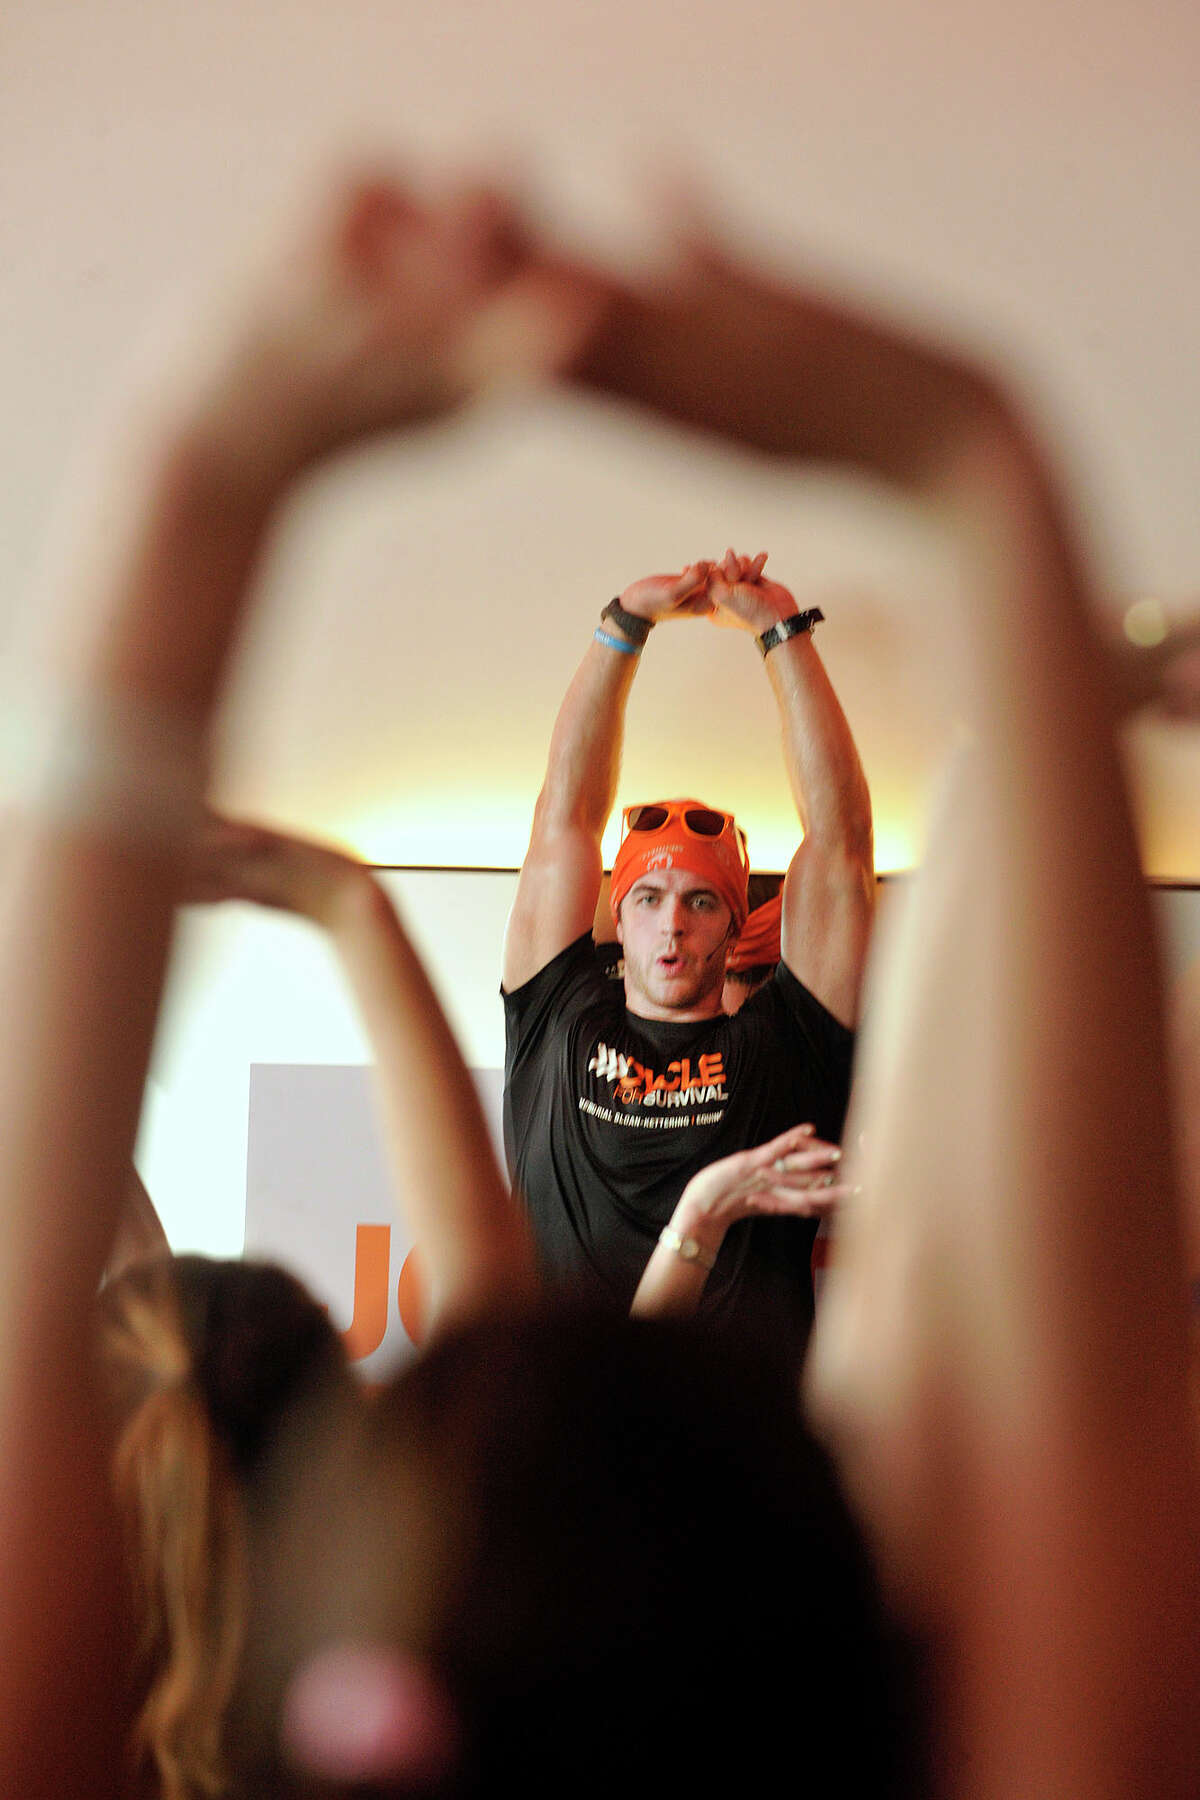 Webb Travis leads a group of cyclists in stretching exercises during the Cycle for Survival event benefiting Memorial Sloan Kettering Cancer Center at Equinox fitness center in Greenwich, Conn., on Sunday, Feb. 23, 2014. Nationally, Cycle for Survival has raised over $47 million for rare cancer research.